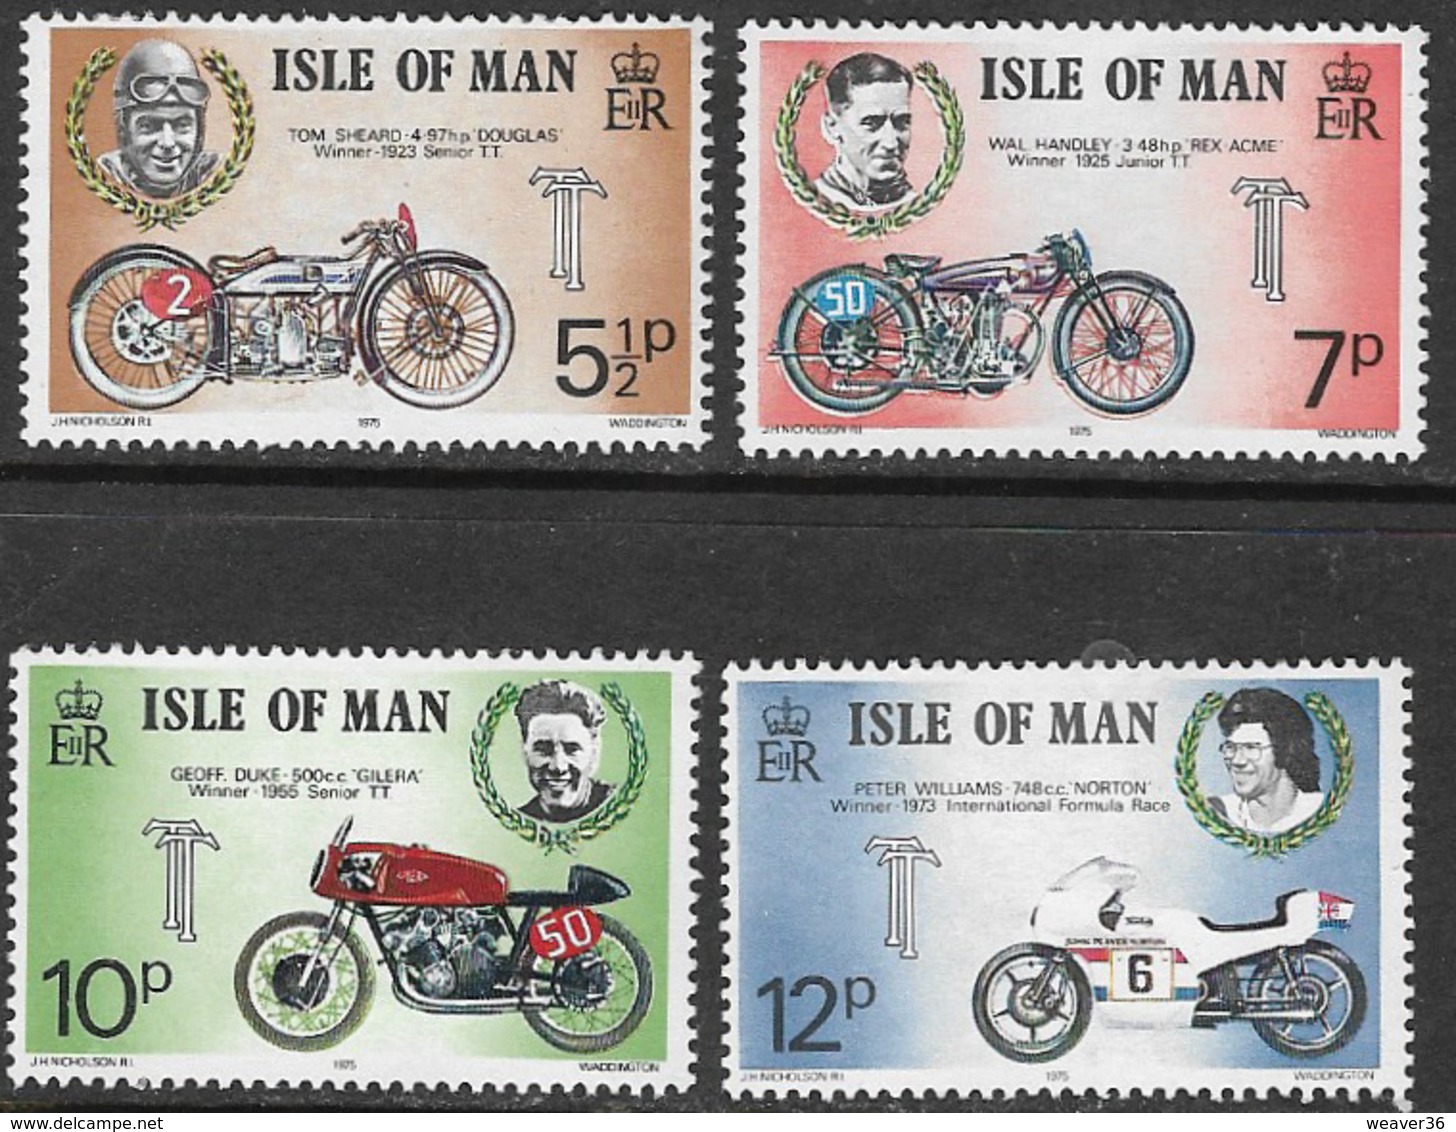 Isle Of Man SG63-66 1975 TT Races (2nd Issue) Set 4v Complete Unmounted Mint [40/32393/25D] - Isle Of Man